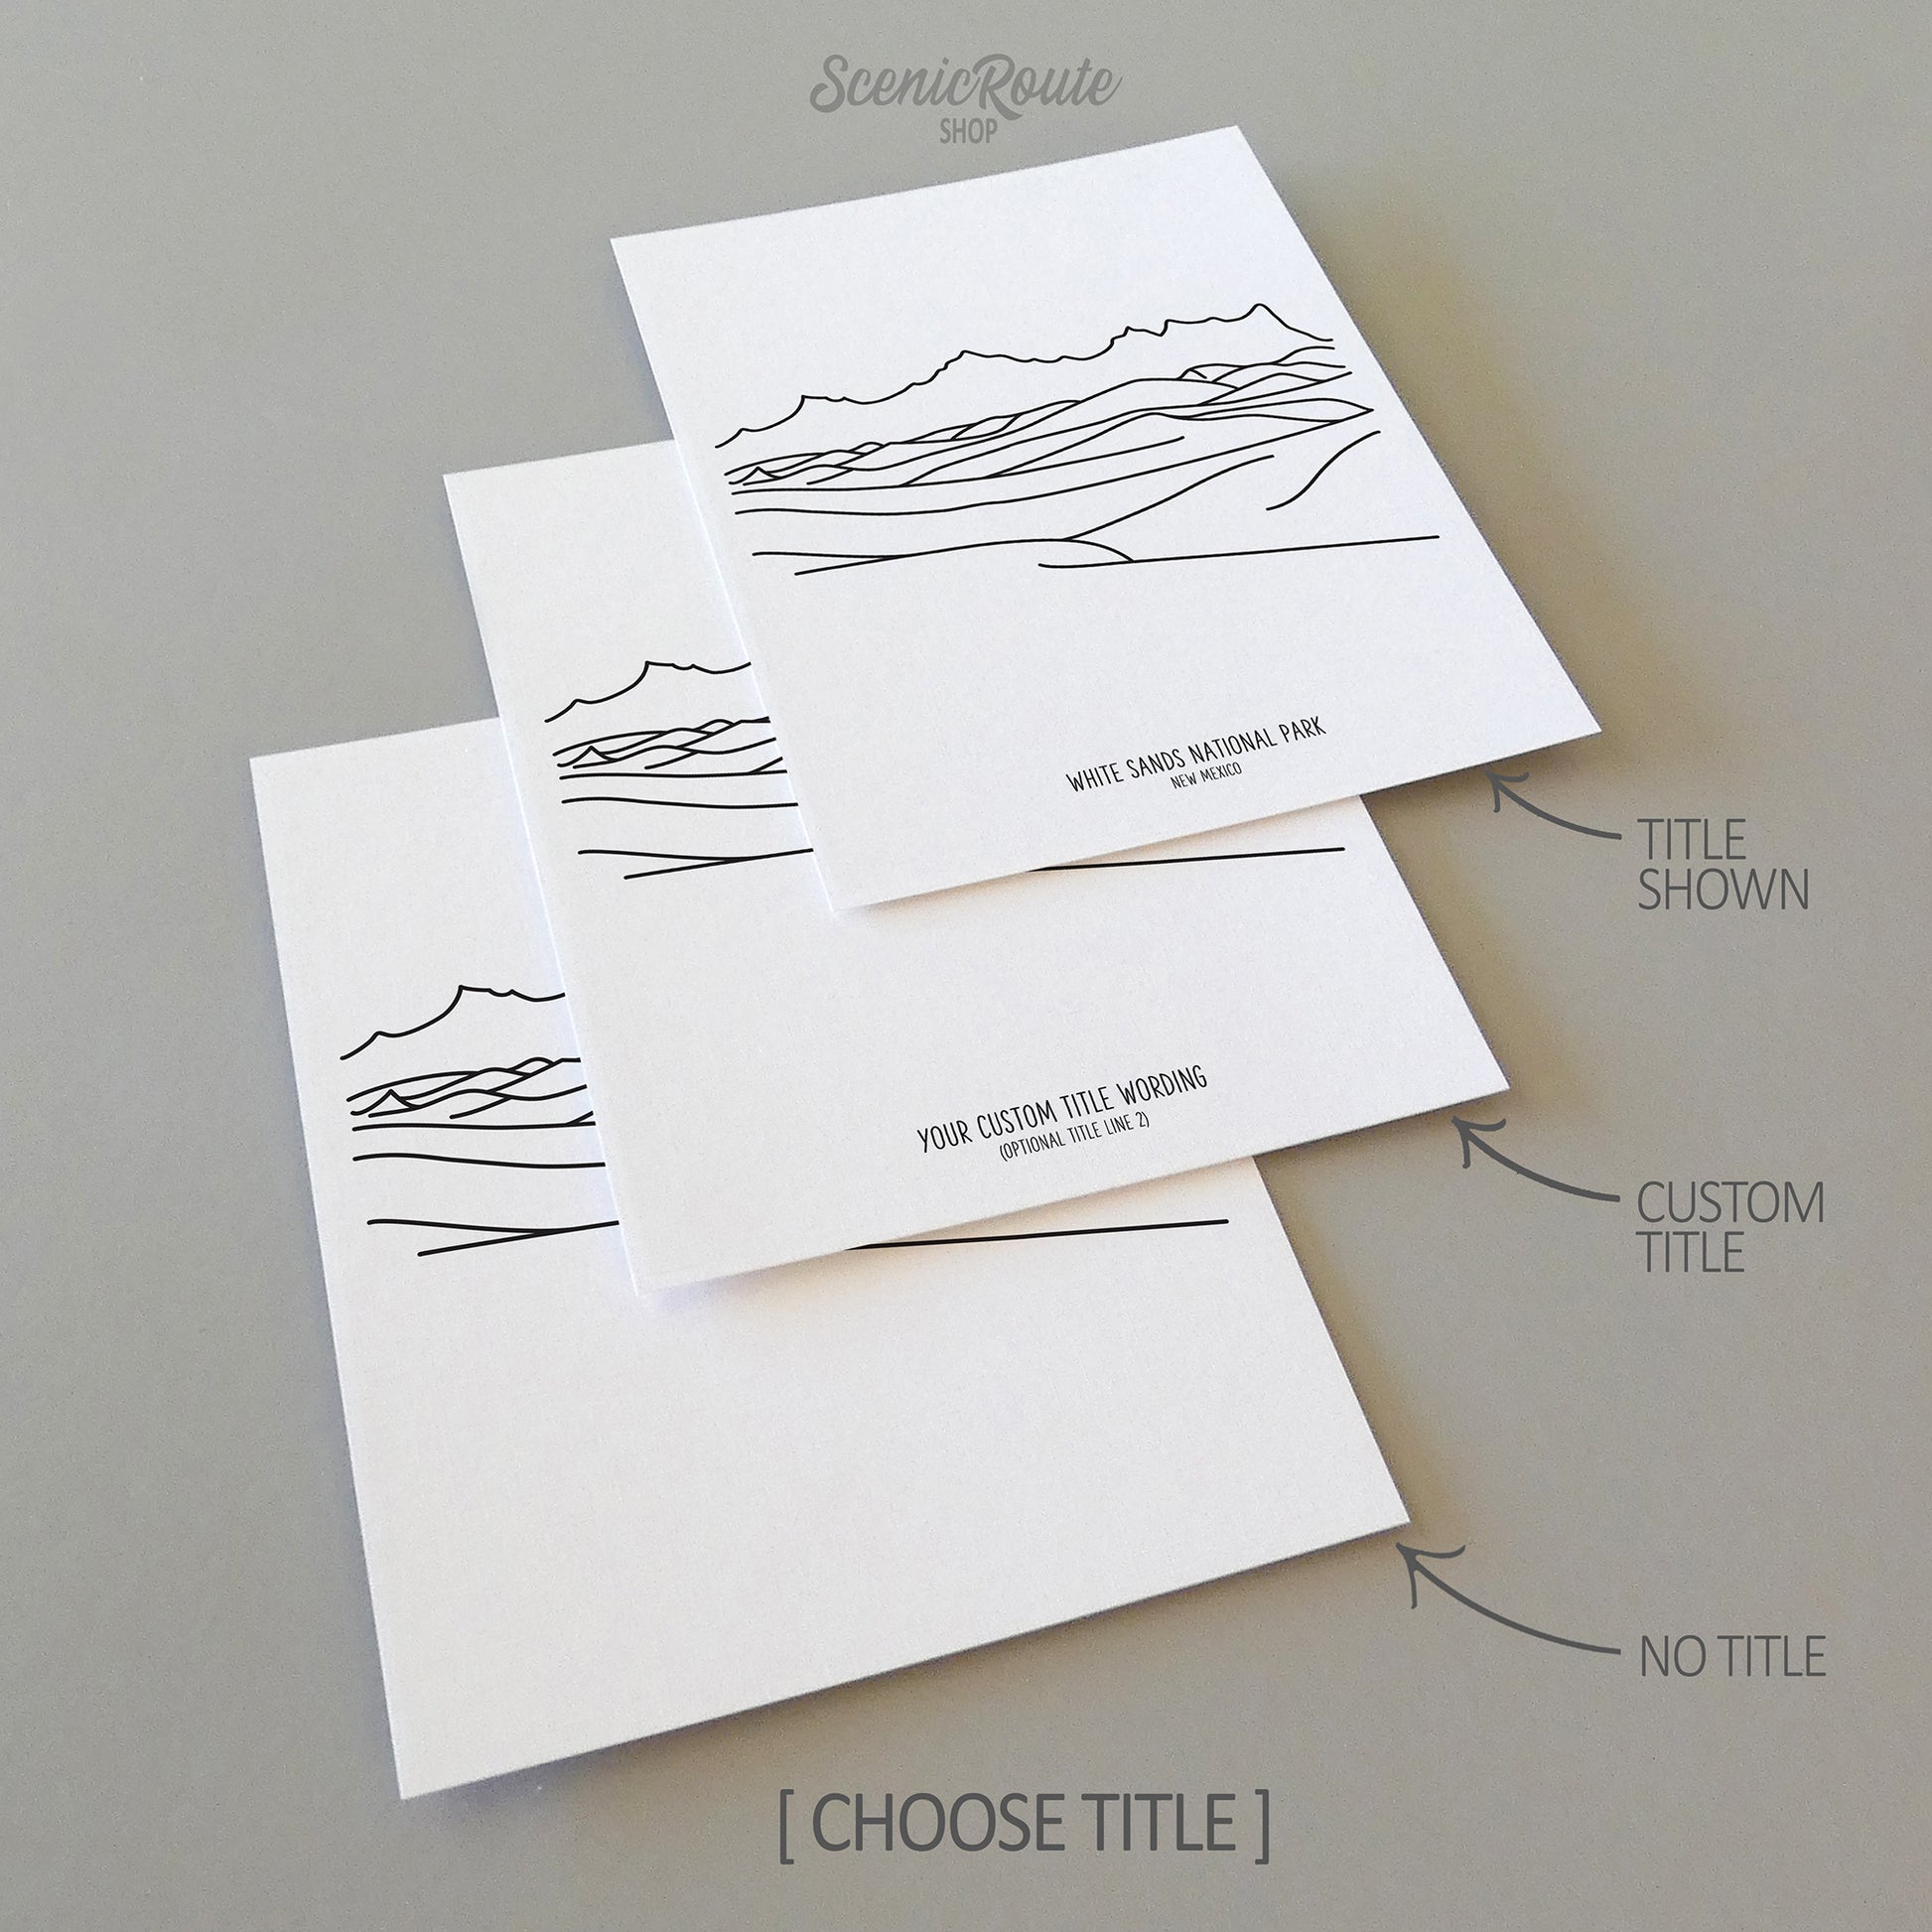 Three line art drawings of White Sands National Park on white linen paper with a gray background. The pieces are shown with title options that can be chosen and personalized.